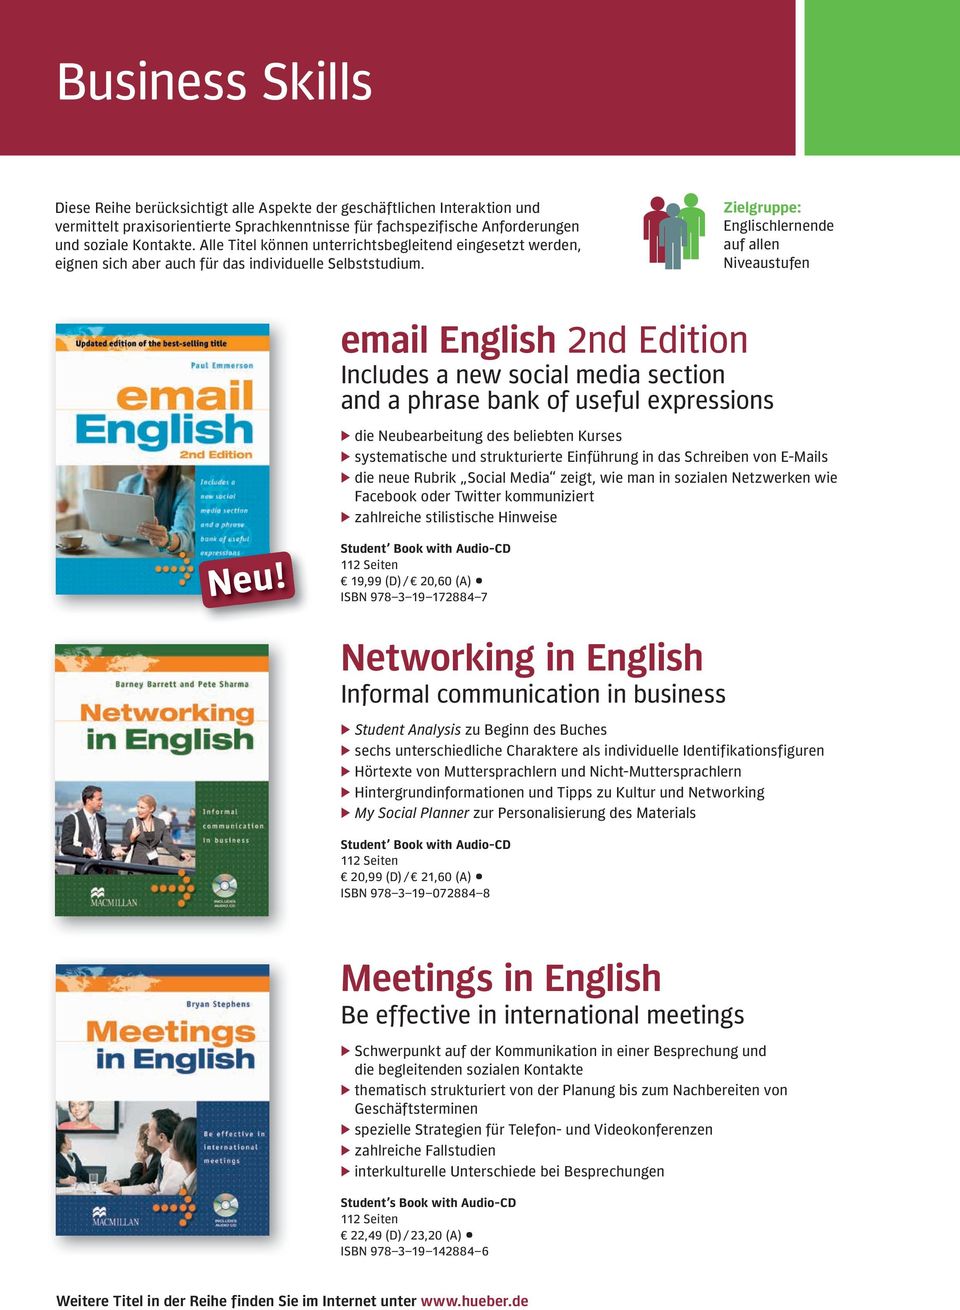 Zielgruppe: Englischlernende auf allen Niveaustufen email English 2nd Edition Includes a new social media section and a phrase bank of useful expressions die Neubearbeitung des beliebten Kurses